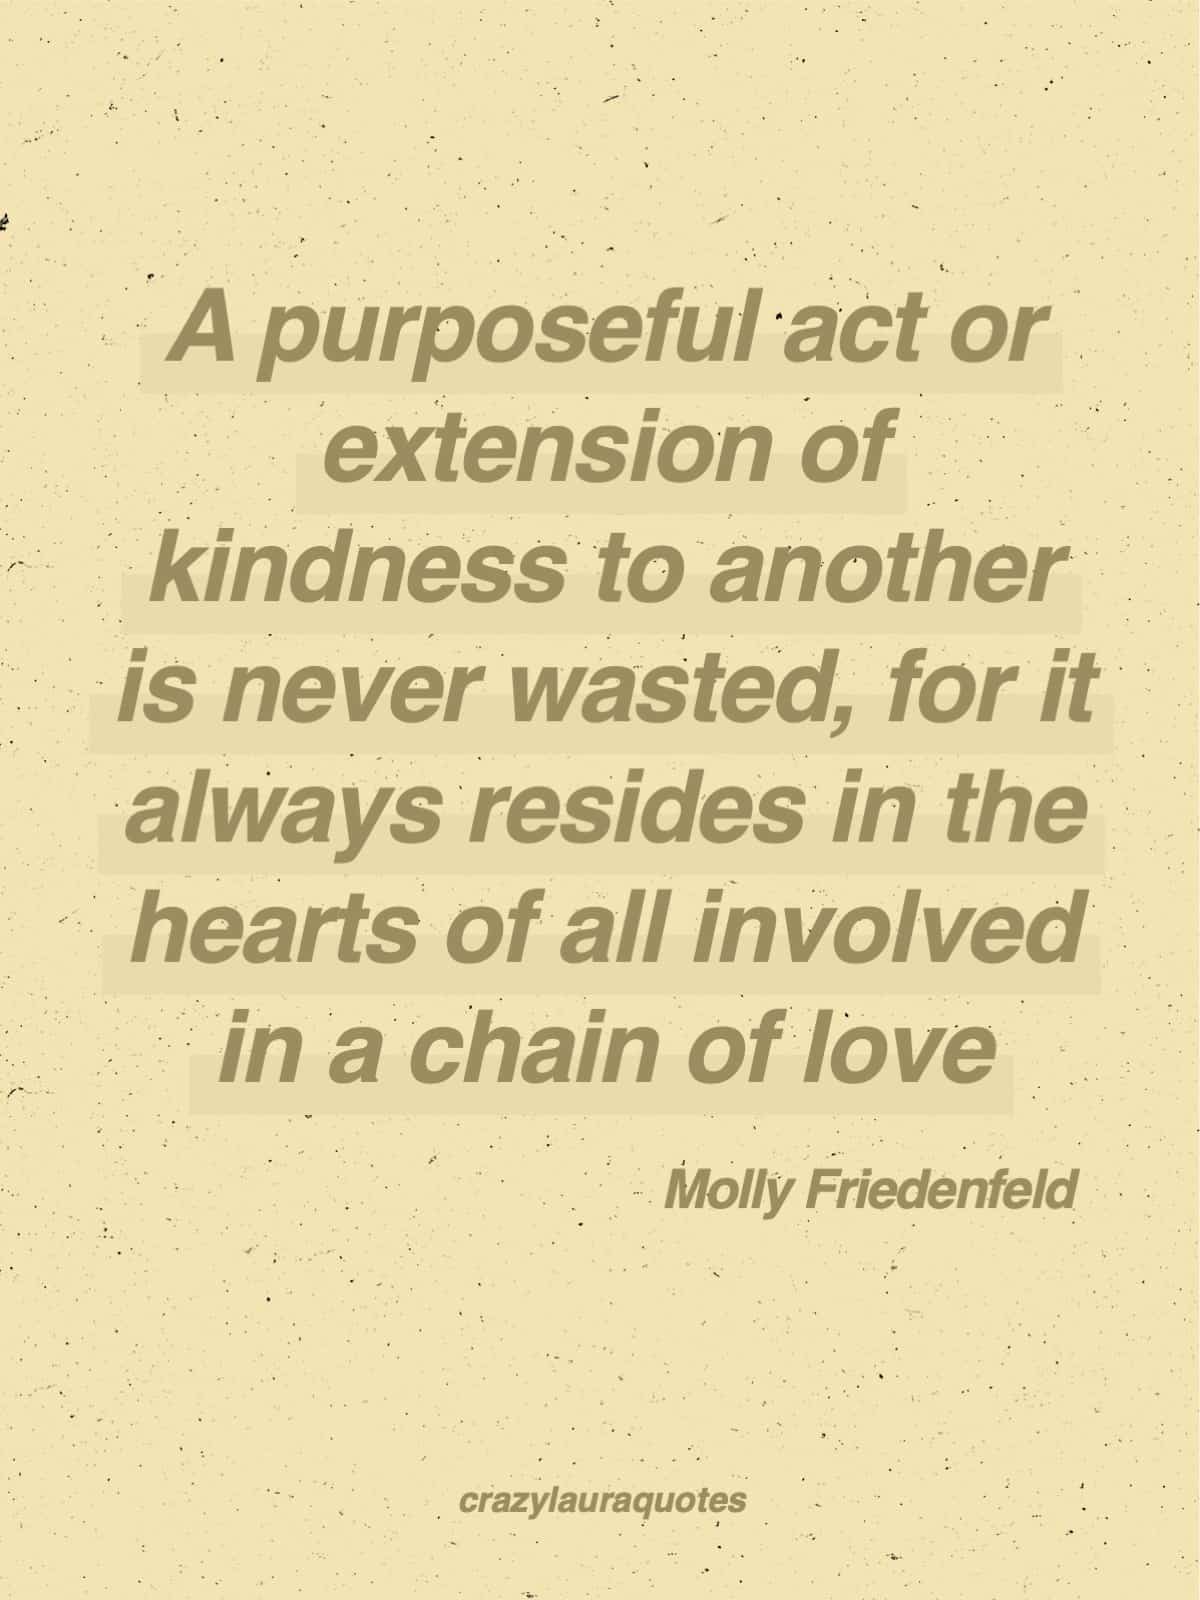 kindness is never wasted molly friedenfeld quote